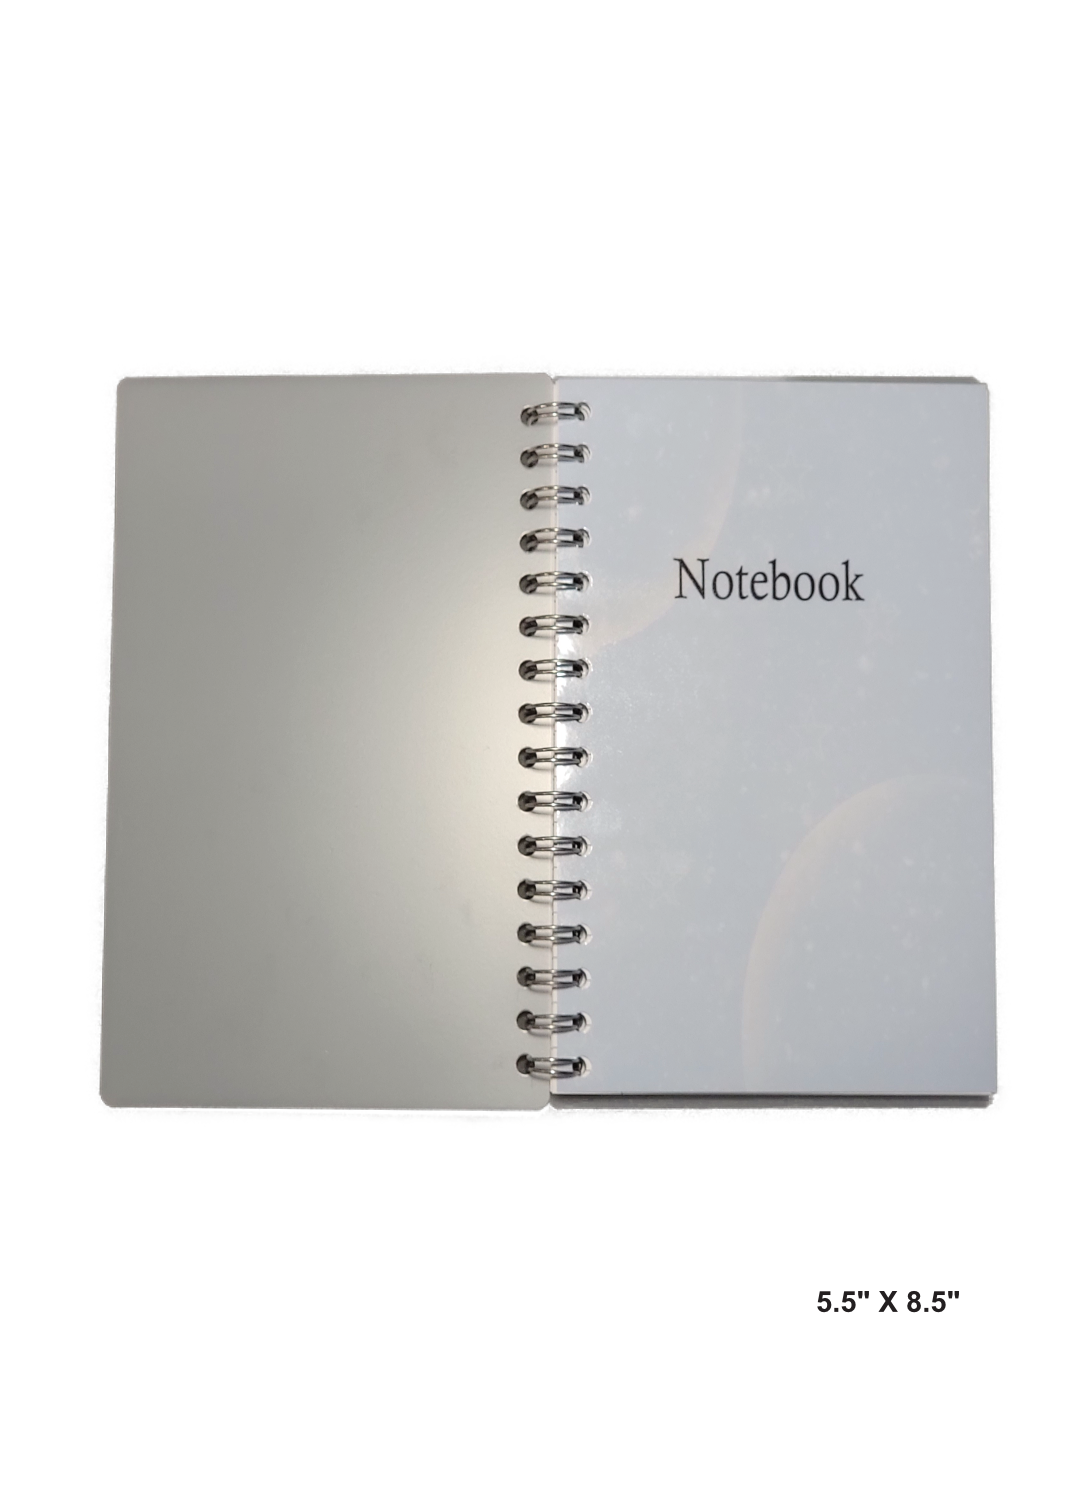 Image of hand-made 5.5" x 8.5" notebook with two moons in each conner making it feel out of space. The notebook's pages are lined for writing or journaling.